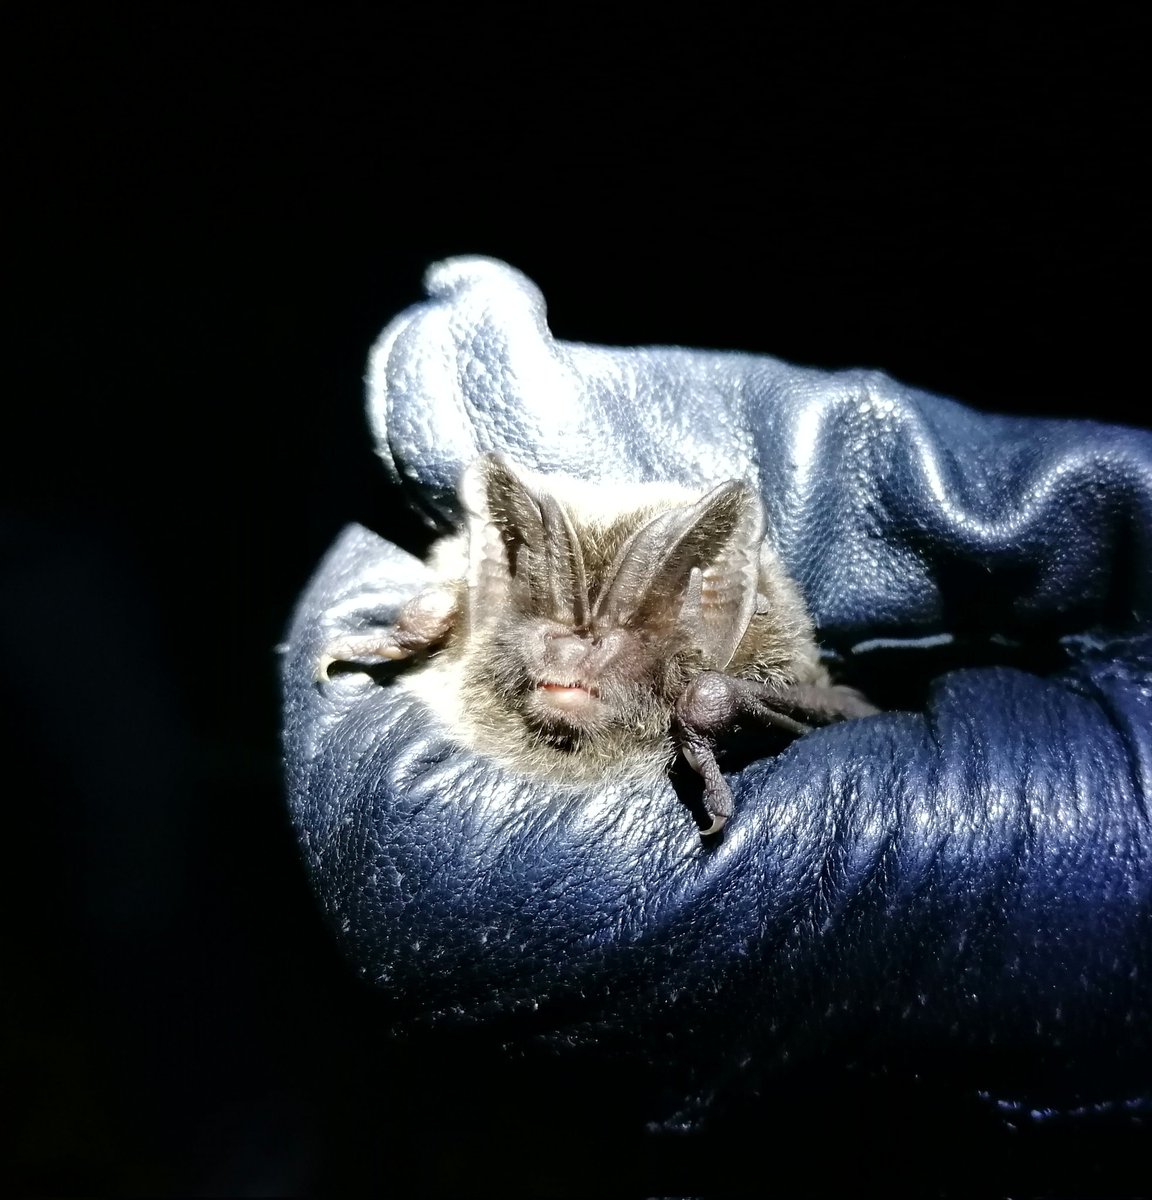 Oh go on then. It's also great when you get to use your new gloves. @_BCT_ @wiltsbg